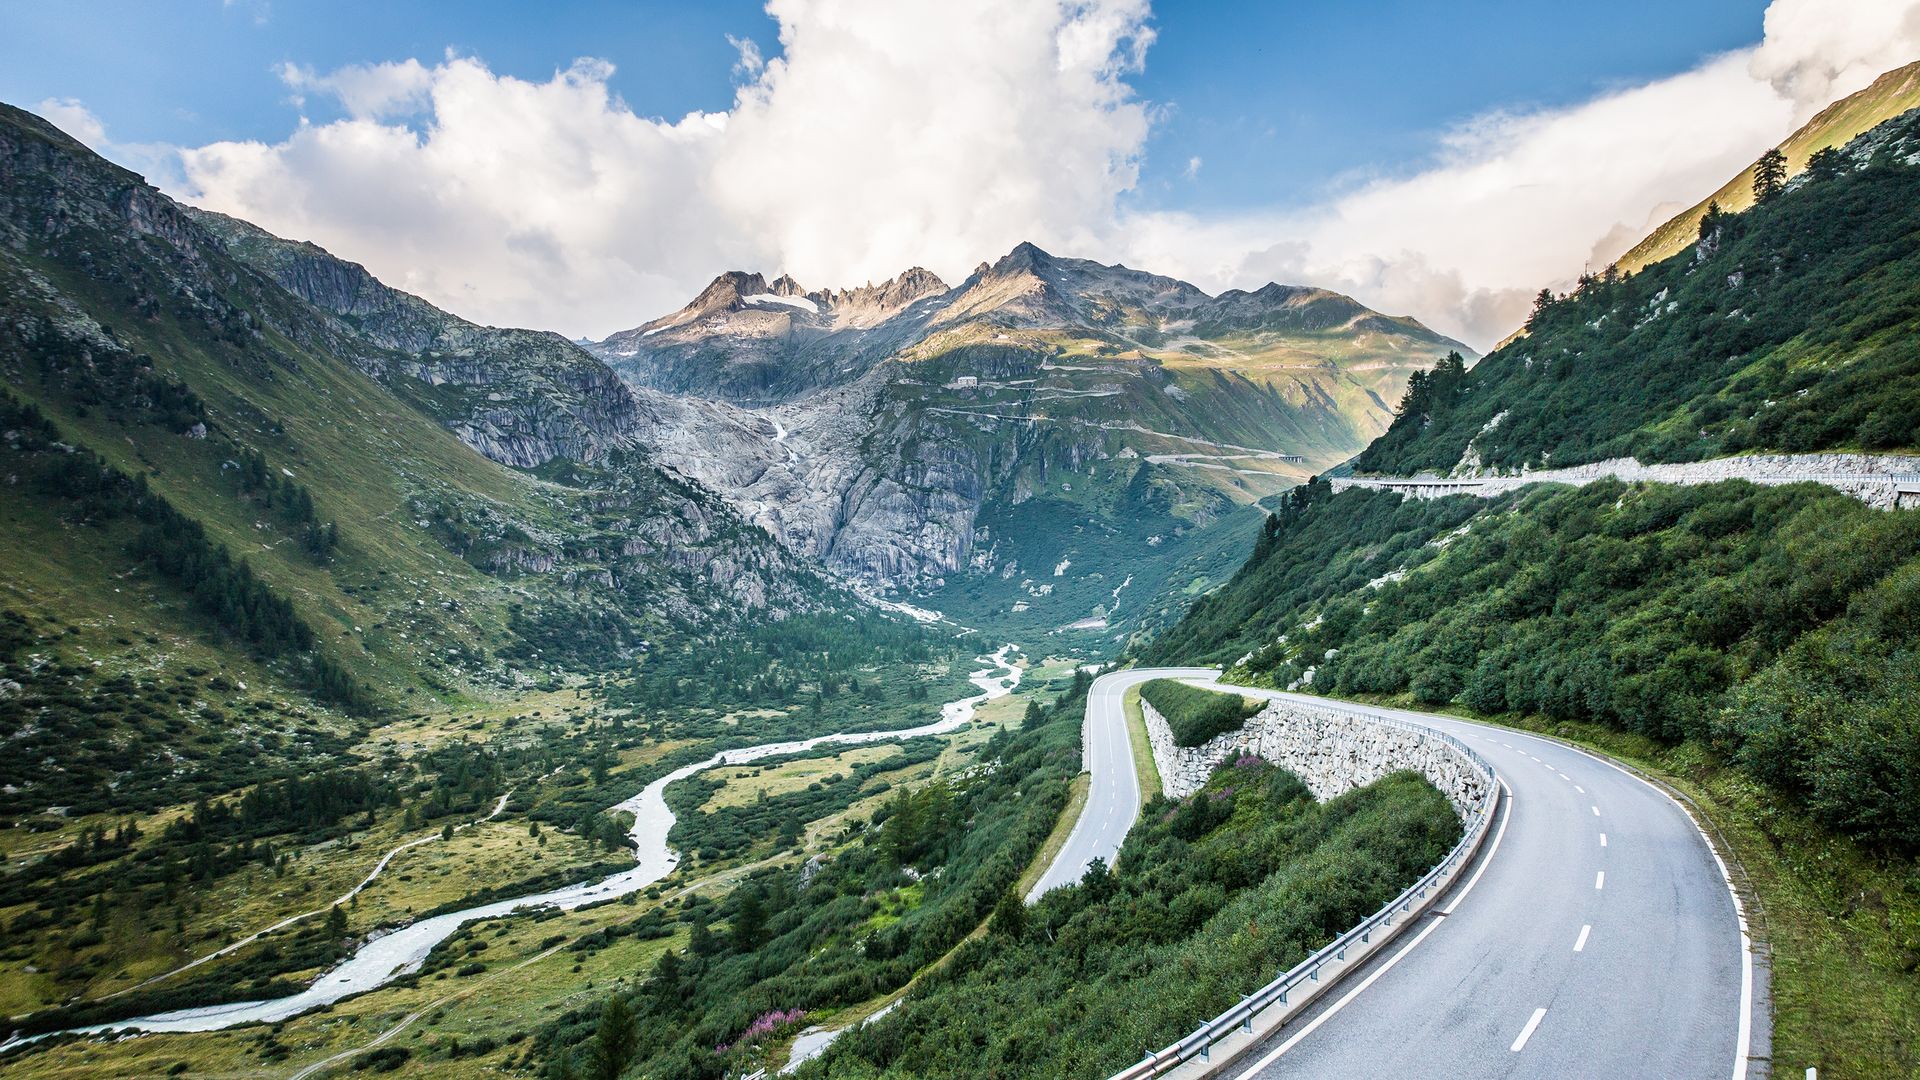 Andermatt is the ideal starting point for breath-taking pass rides by road bike, oldtimer or motorcycle.